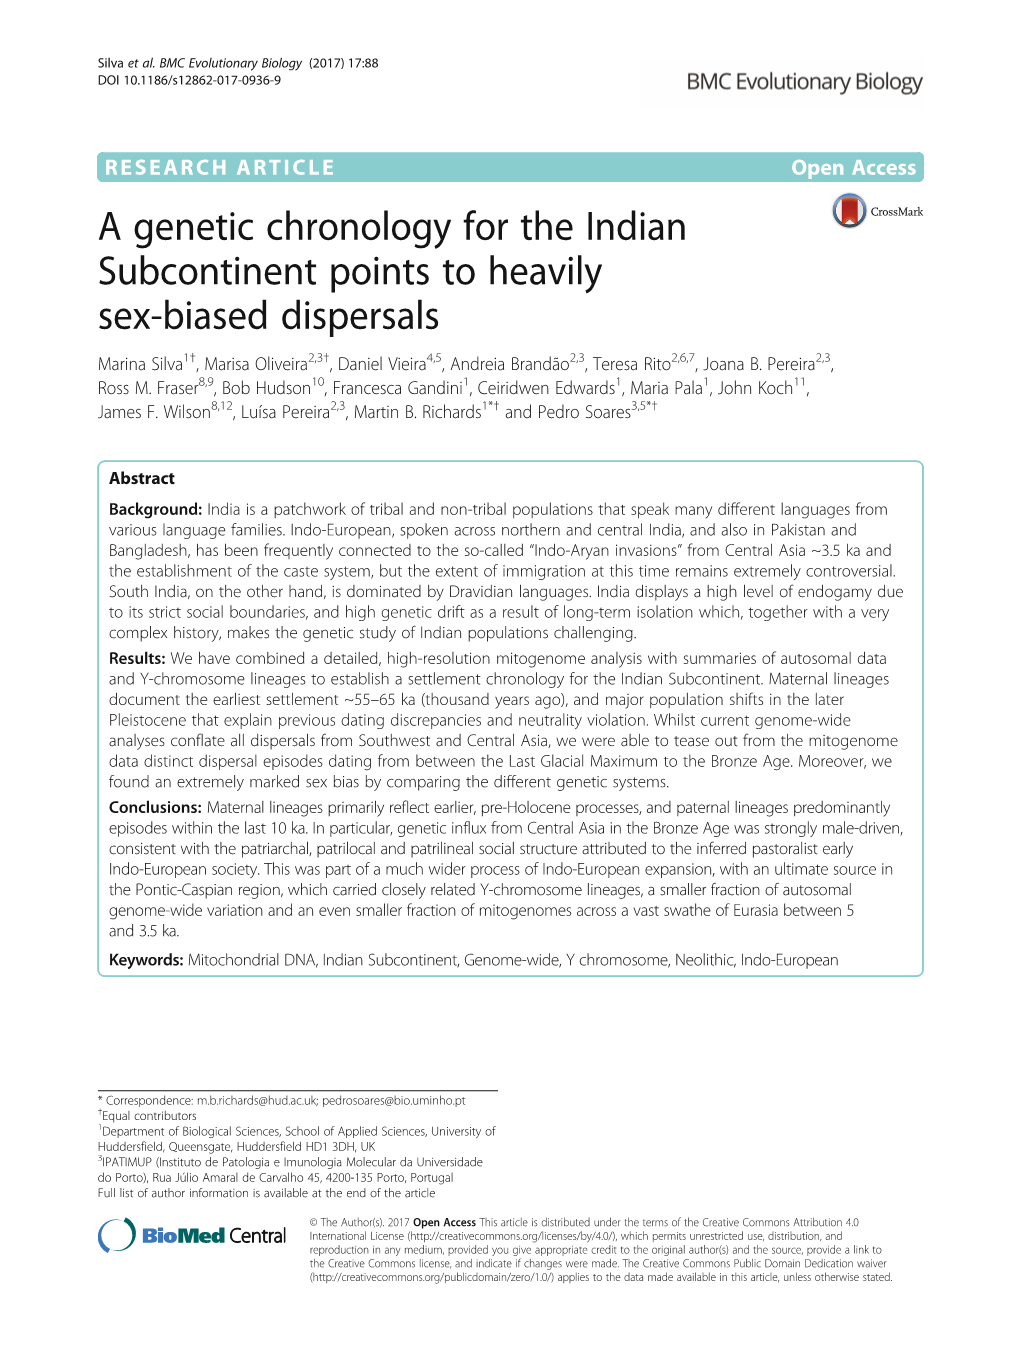 A Genetic Chronology for the Indian Subcontinent Points to Heavily Sex